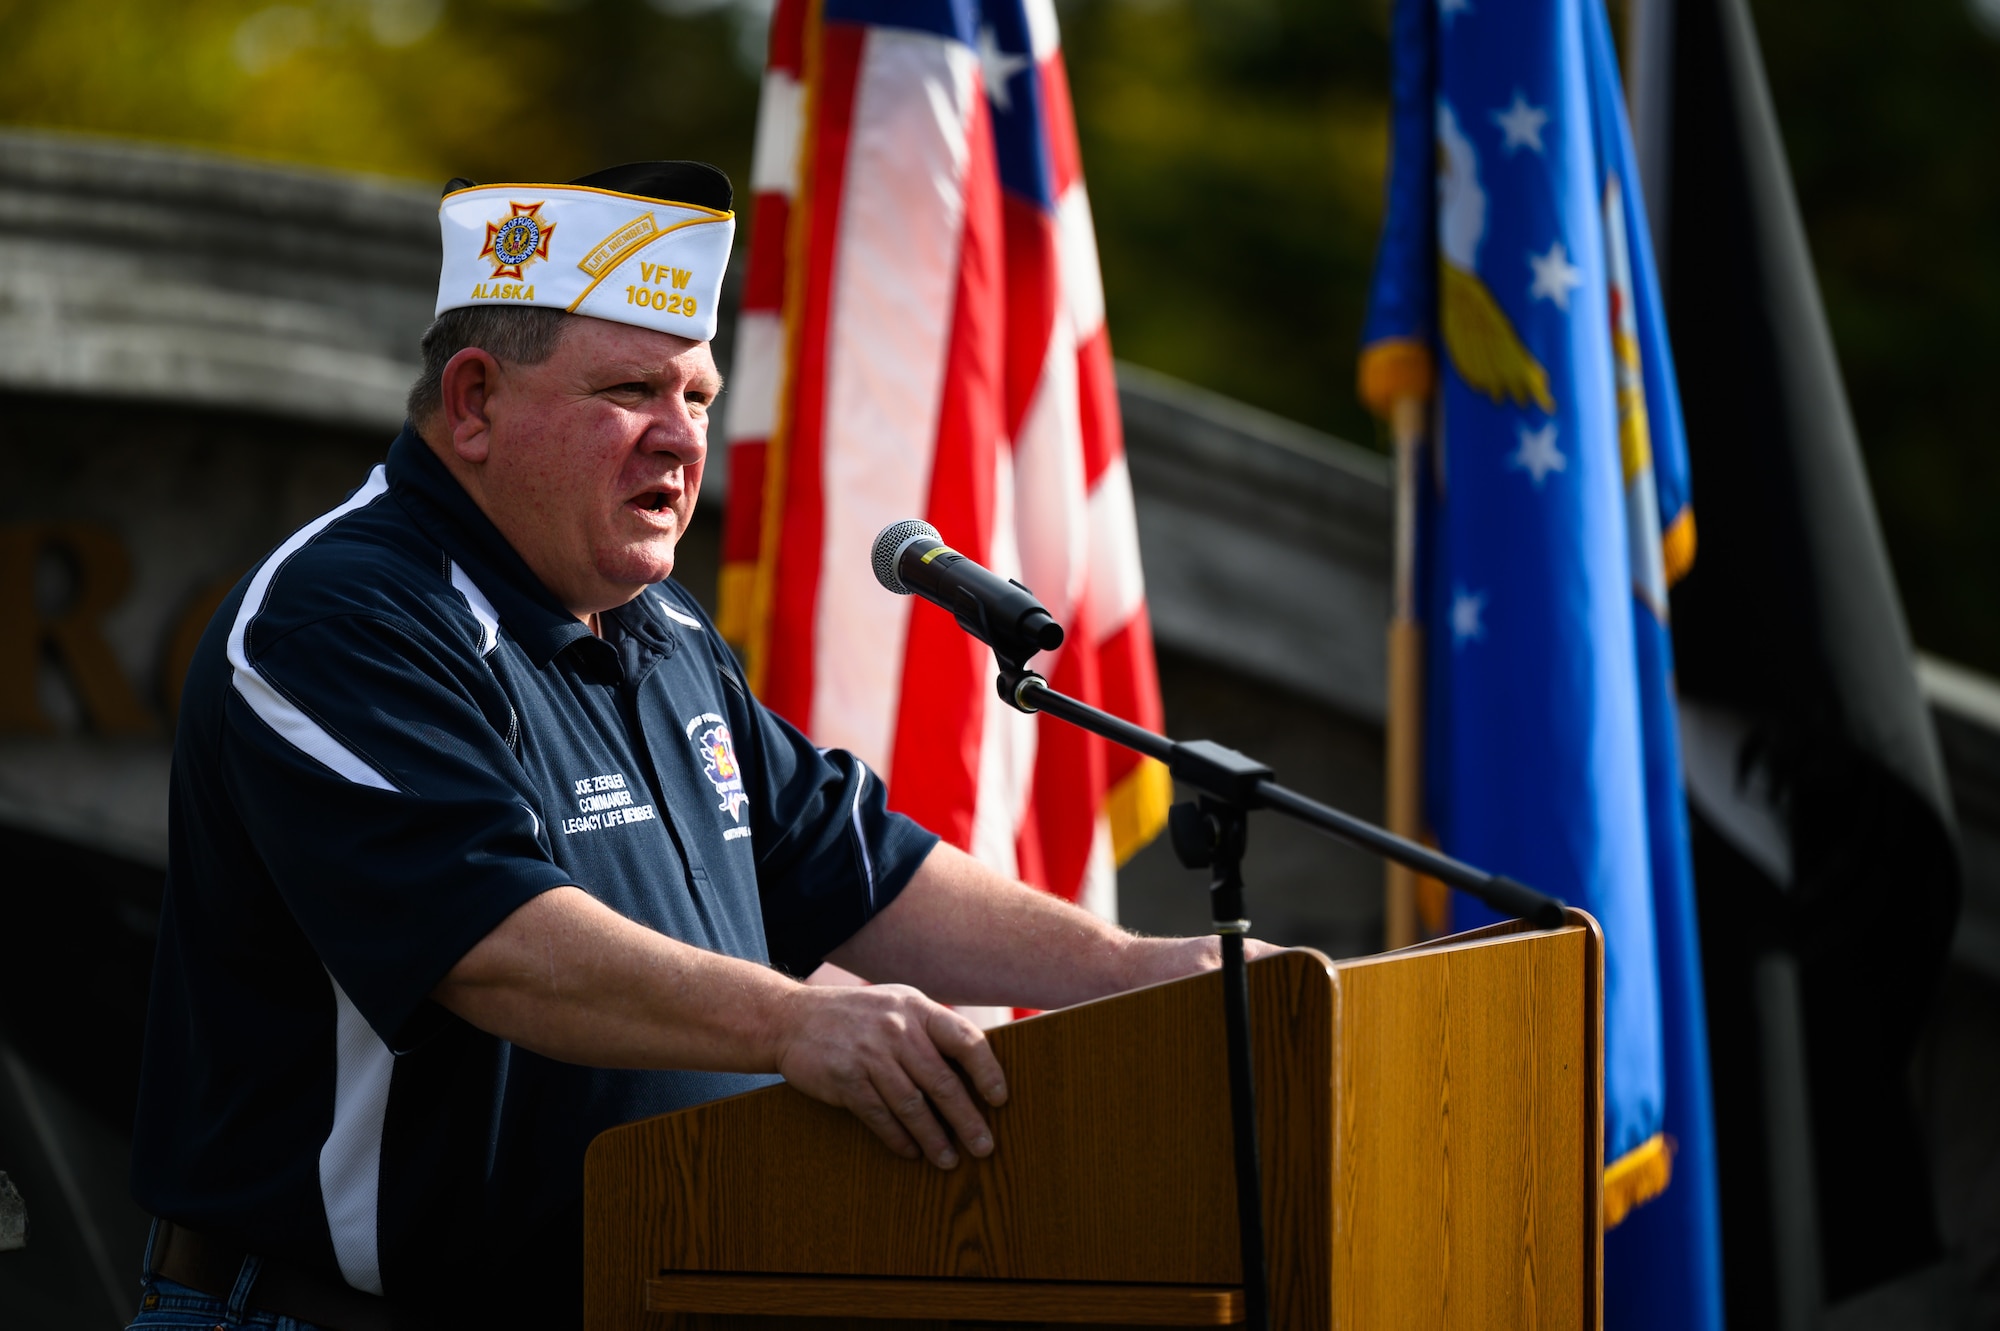 North Pole Veterans of Foreign Wars commander Joe Ziegler delivers a speech during the Prisoners of War/Missing in Action remembrance ceremony on Eielson Air Force Base, Alaska, Sept. 16, 2022.